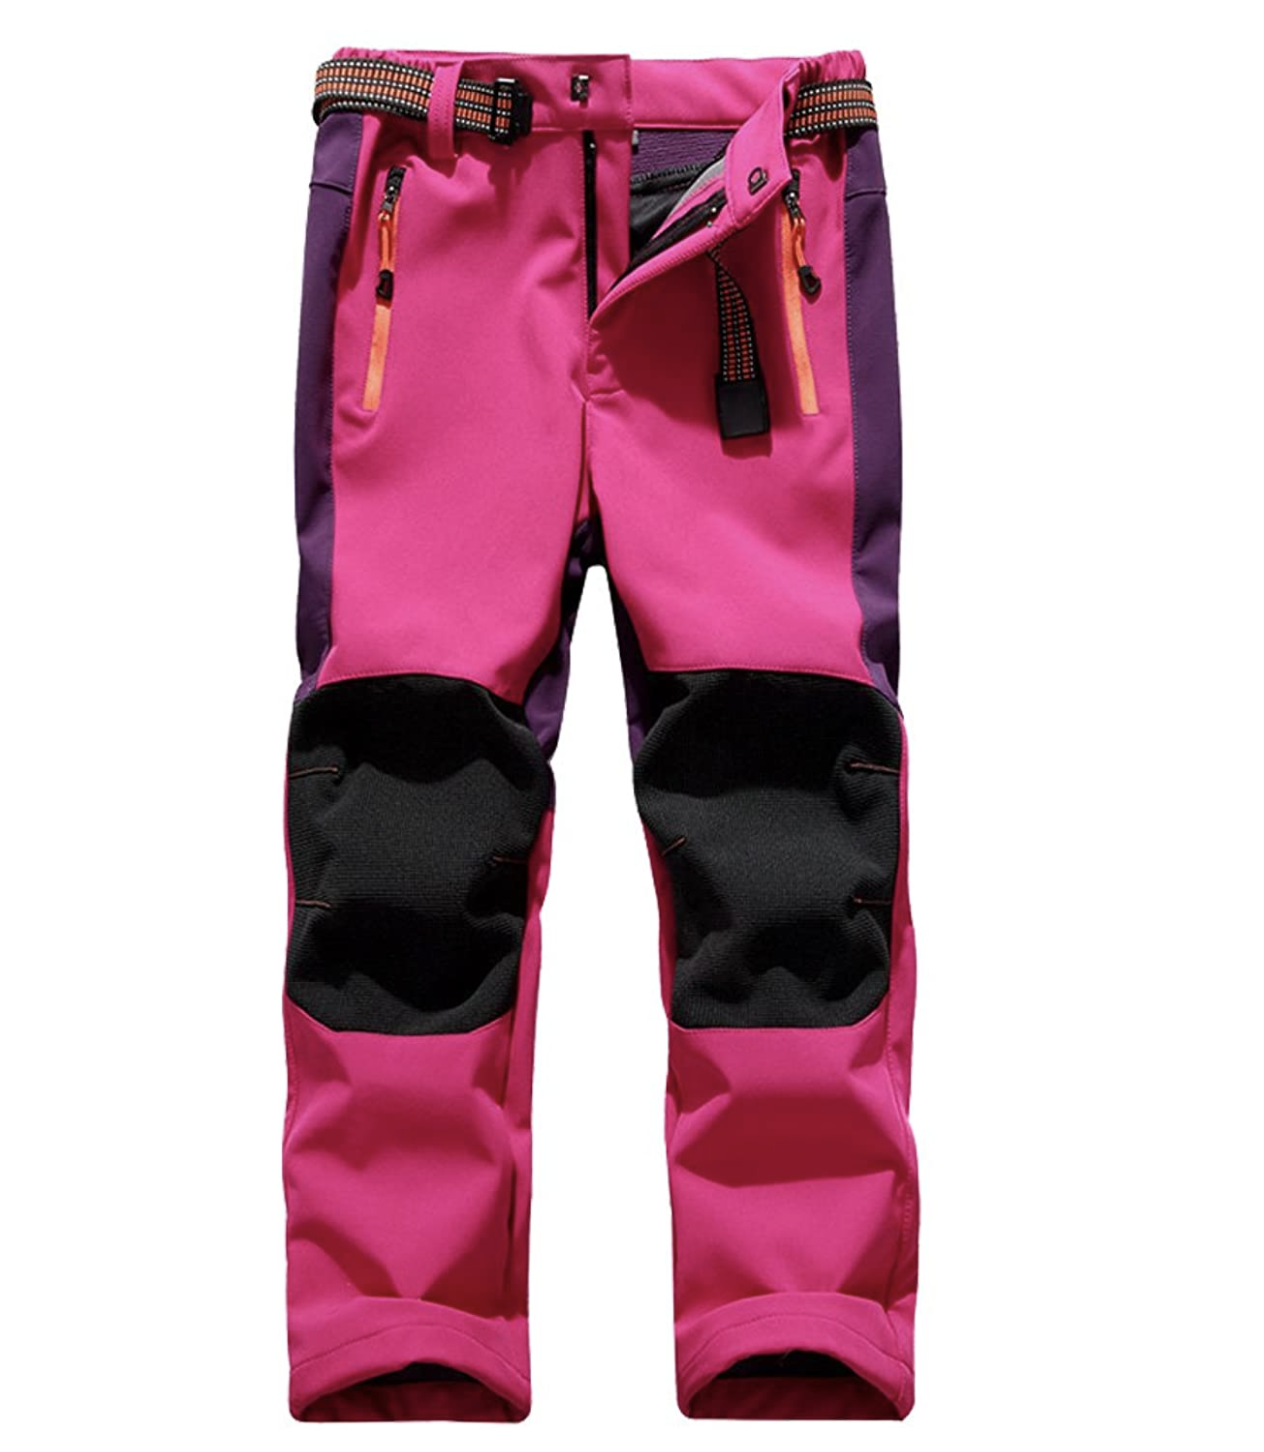  UGREVZ Girls Boys Snow Pants 2-9 Years Old Thick